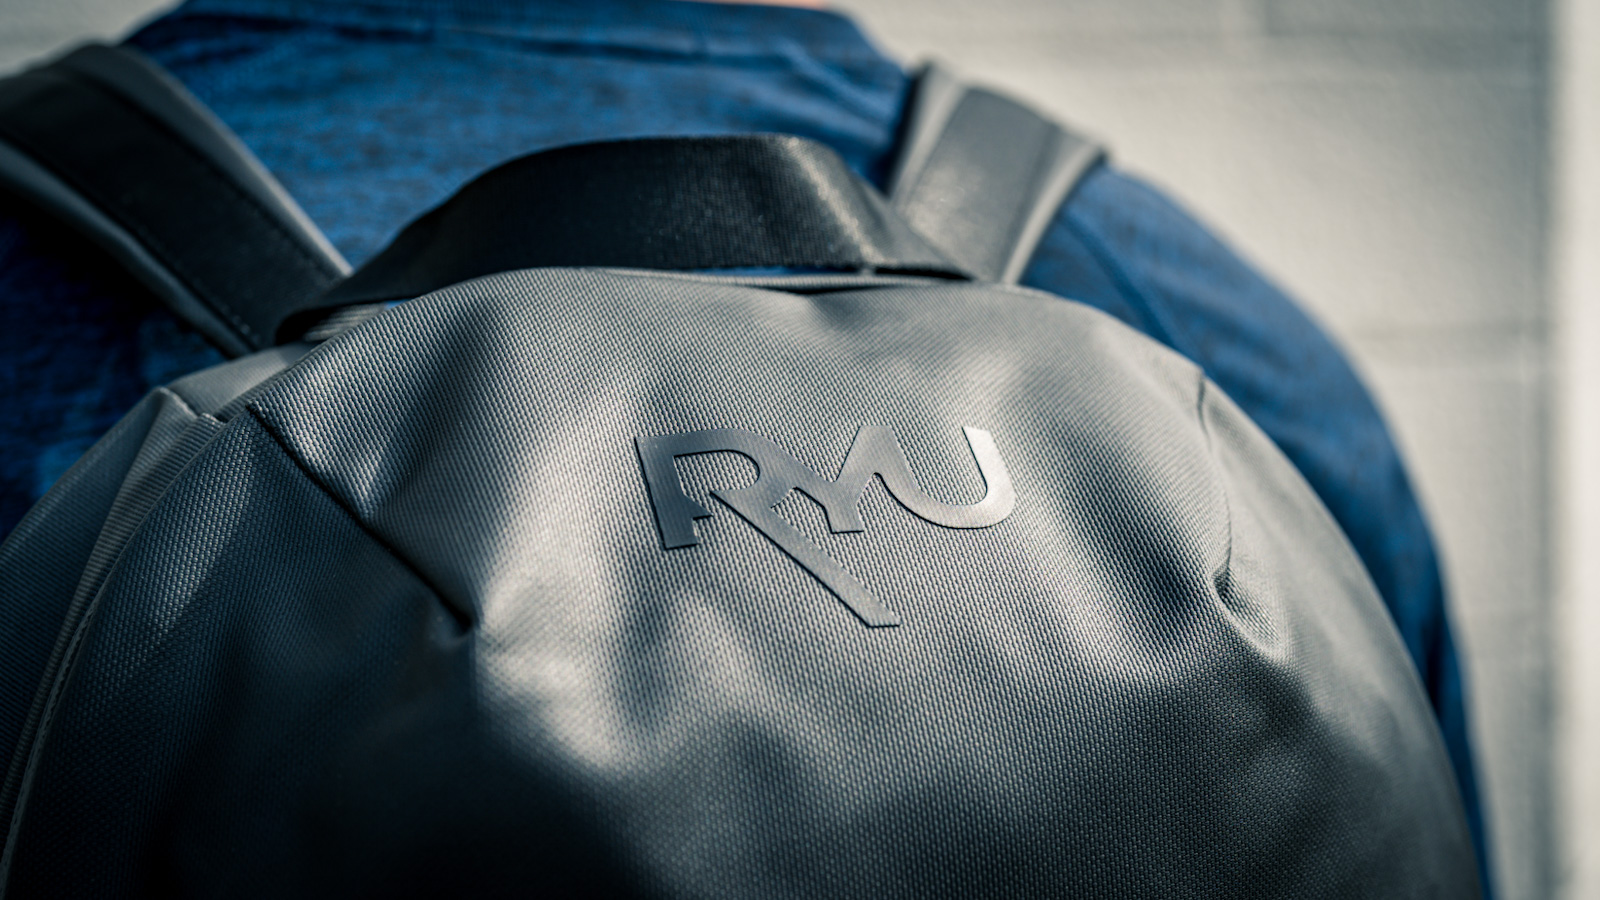 Get Moving with RYU High Performance Apparel